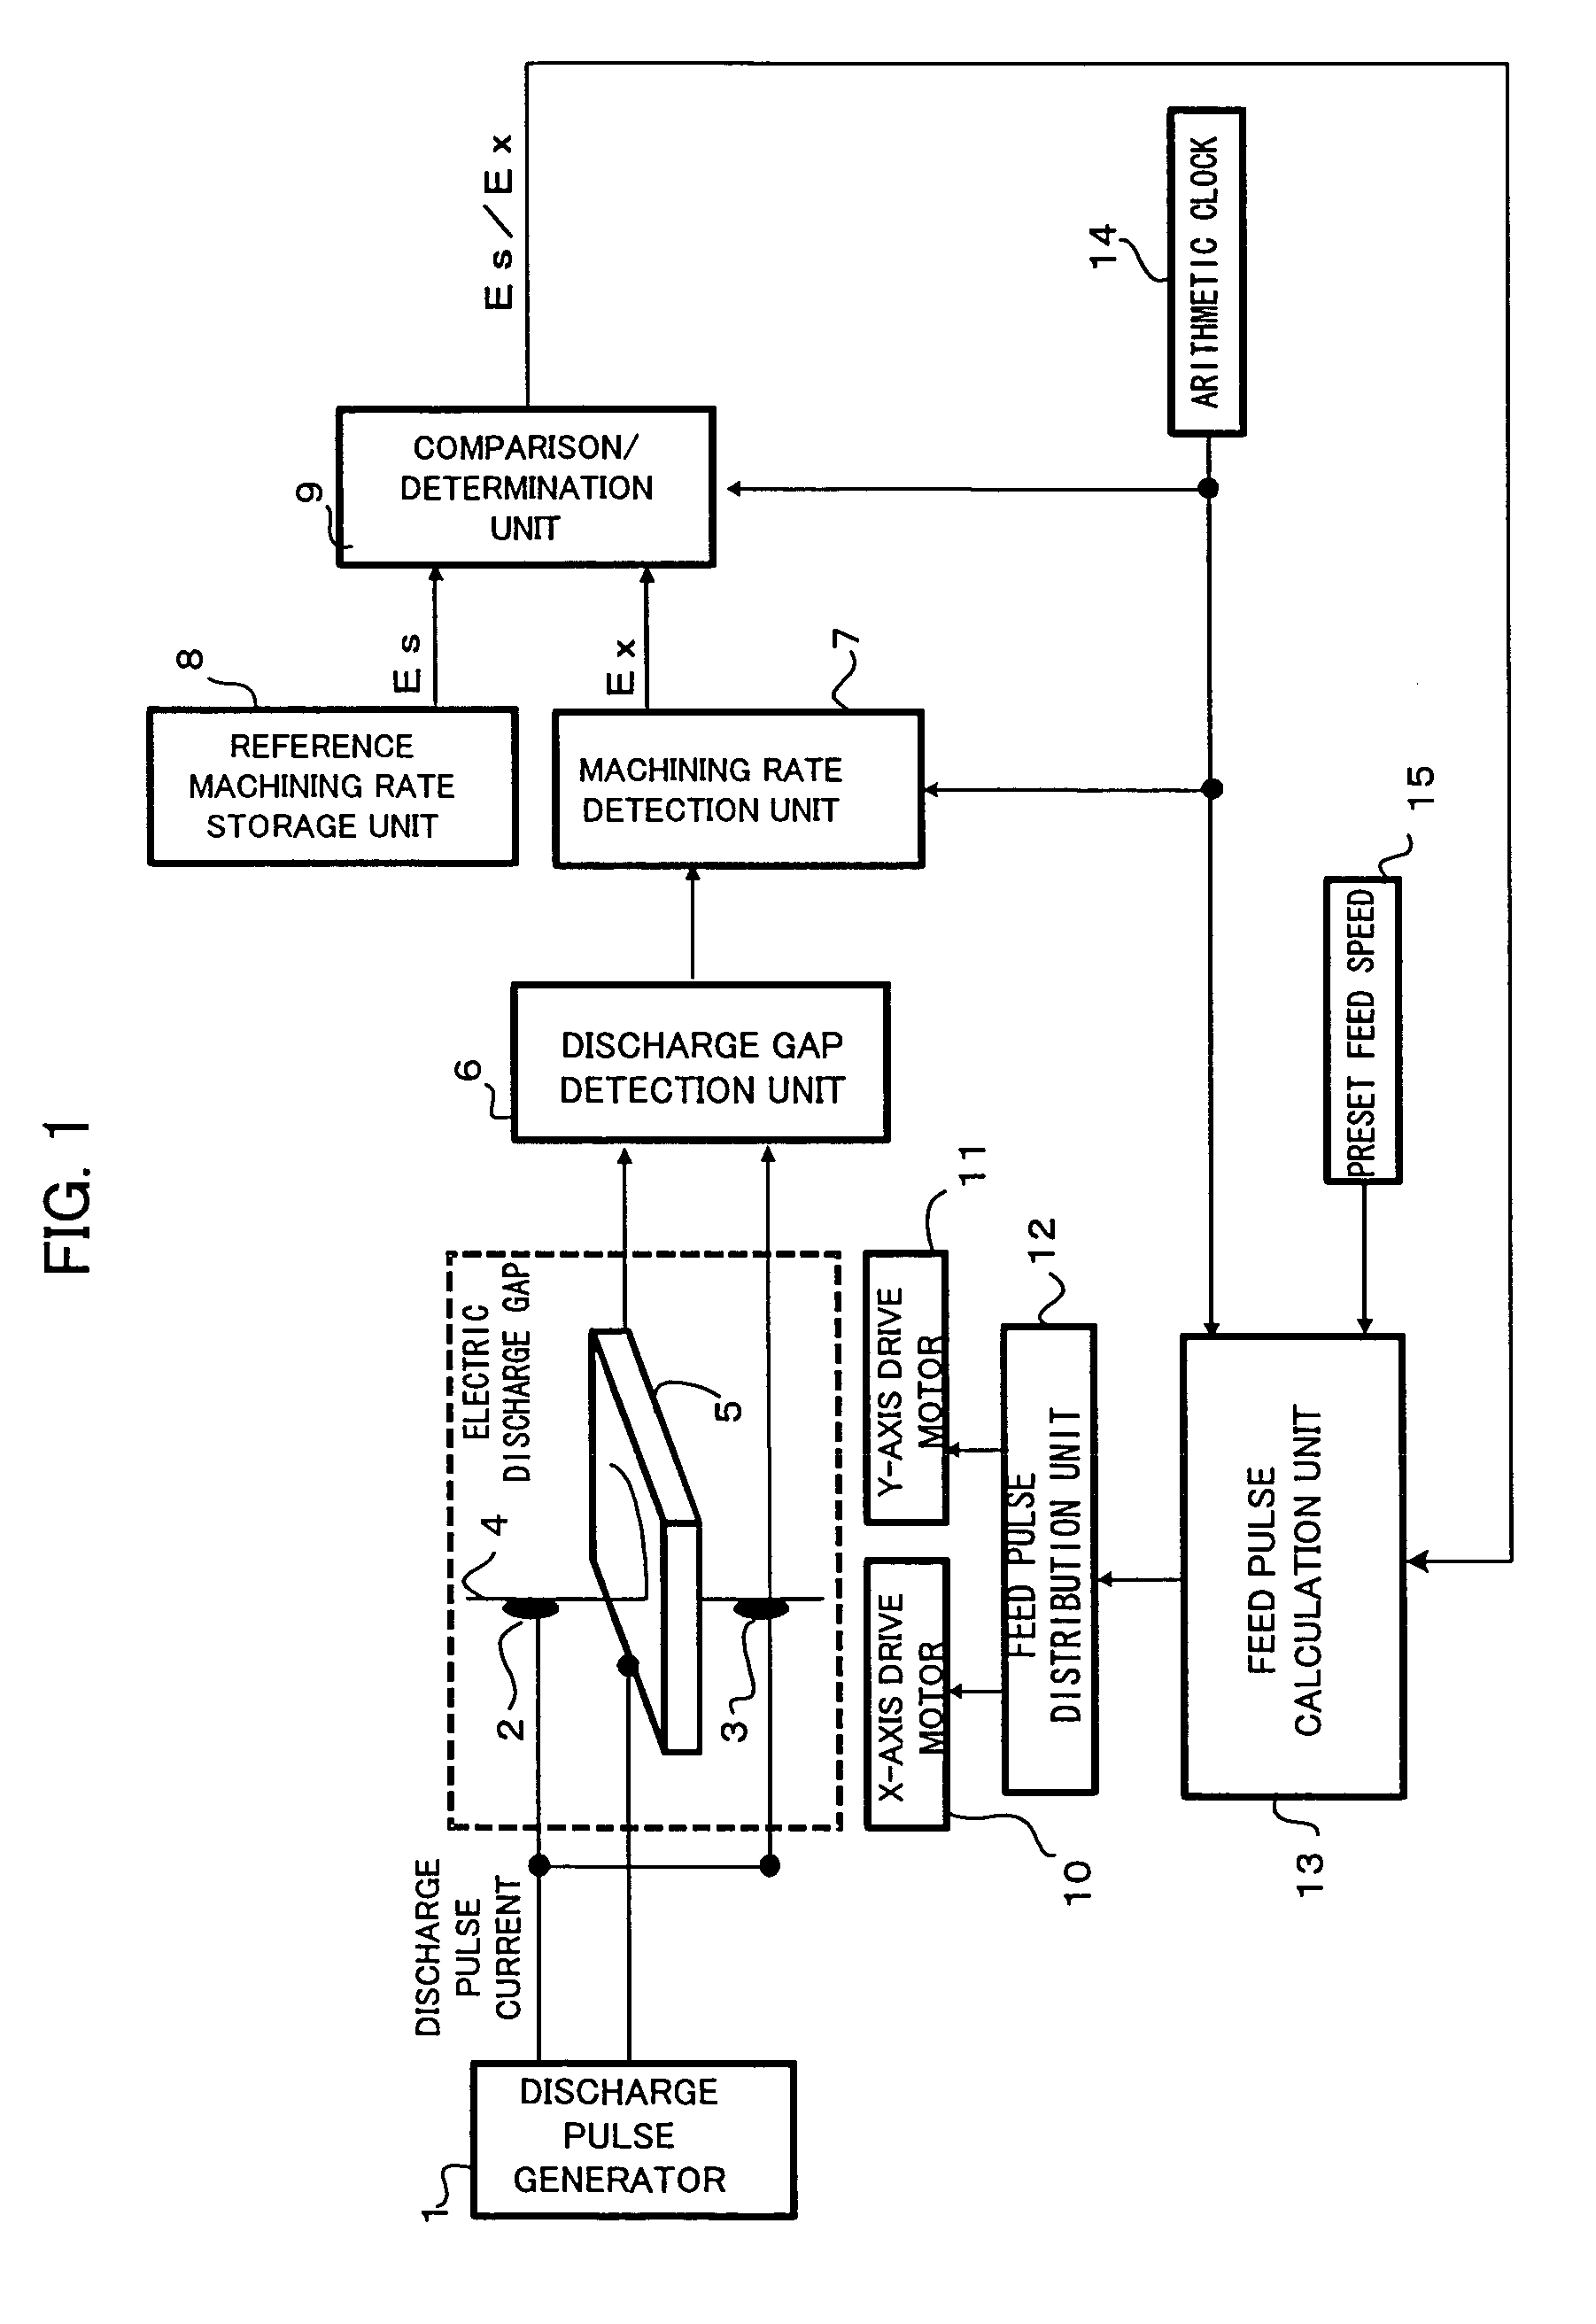 Controller for wire electric discharge machine